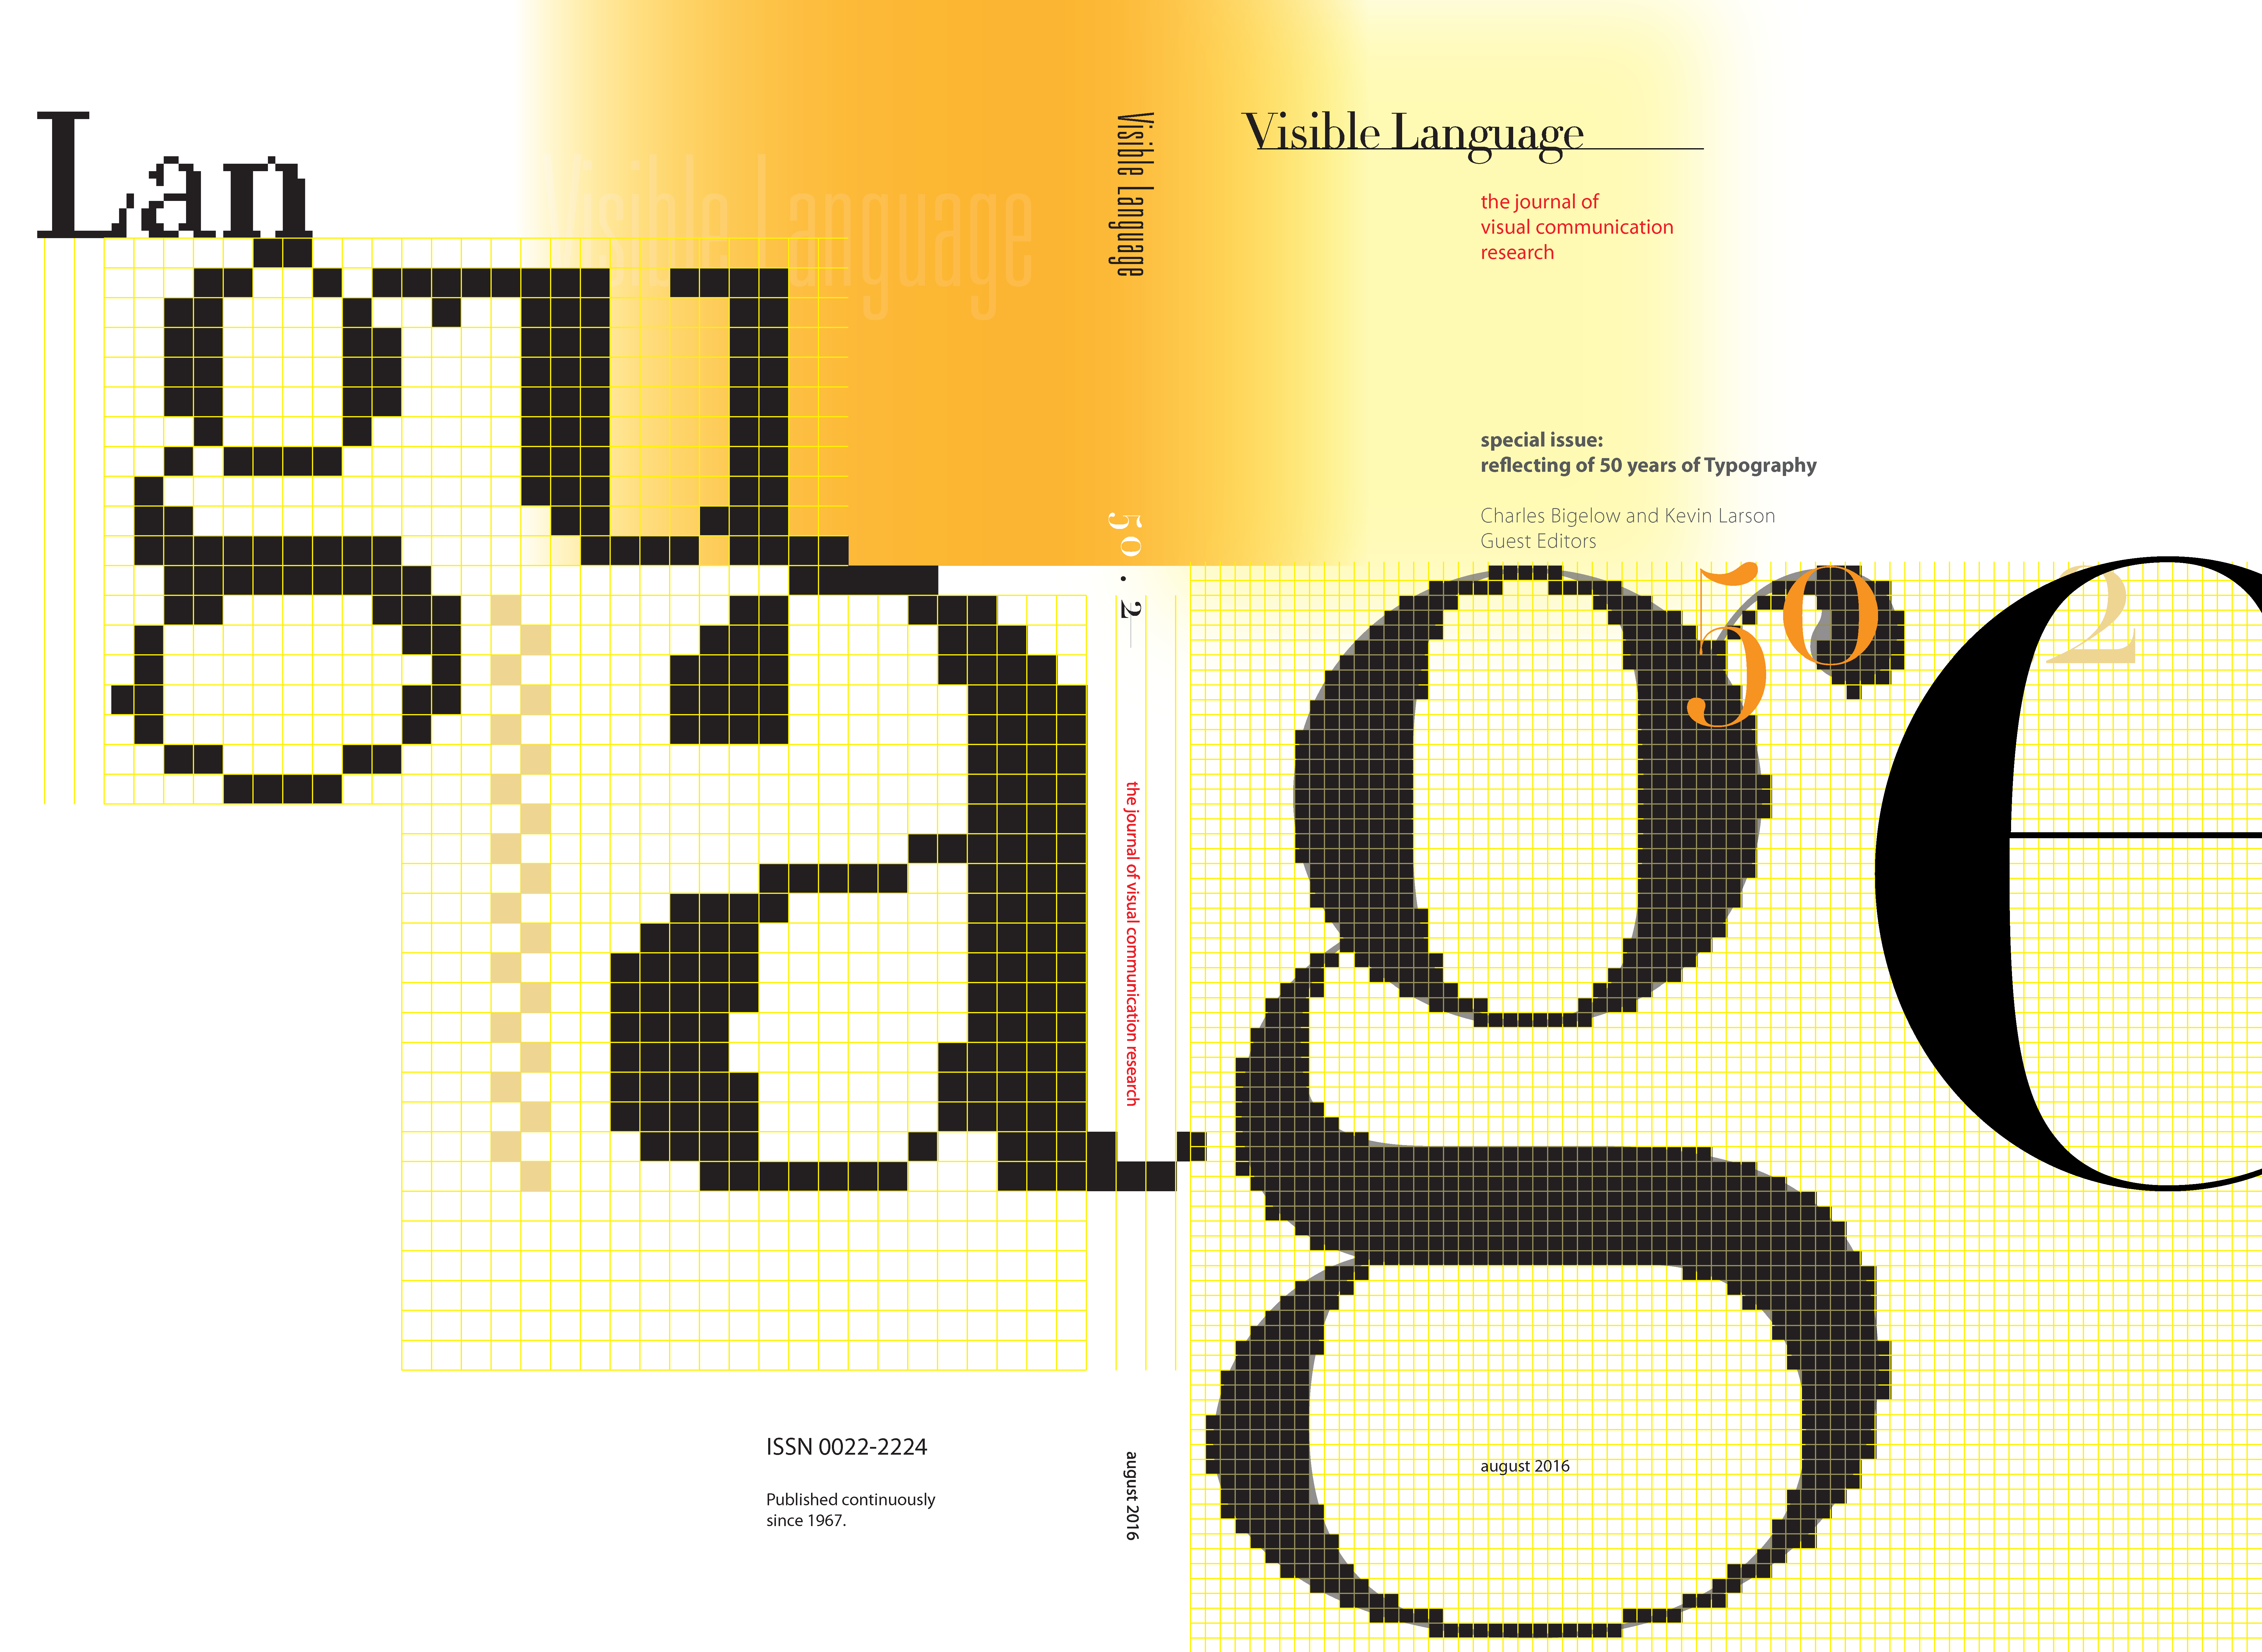 					View Vol. 50 No. 2 (2016): special issue: reflecting on 50 years of Typograph
				